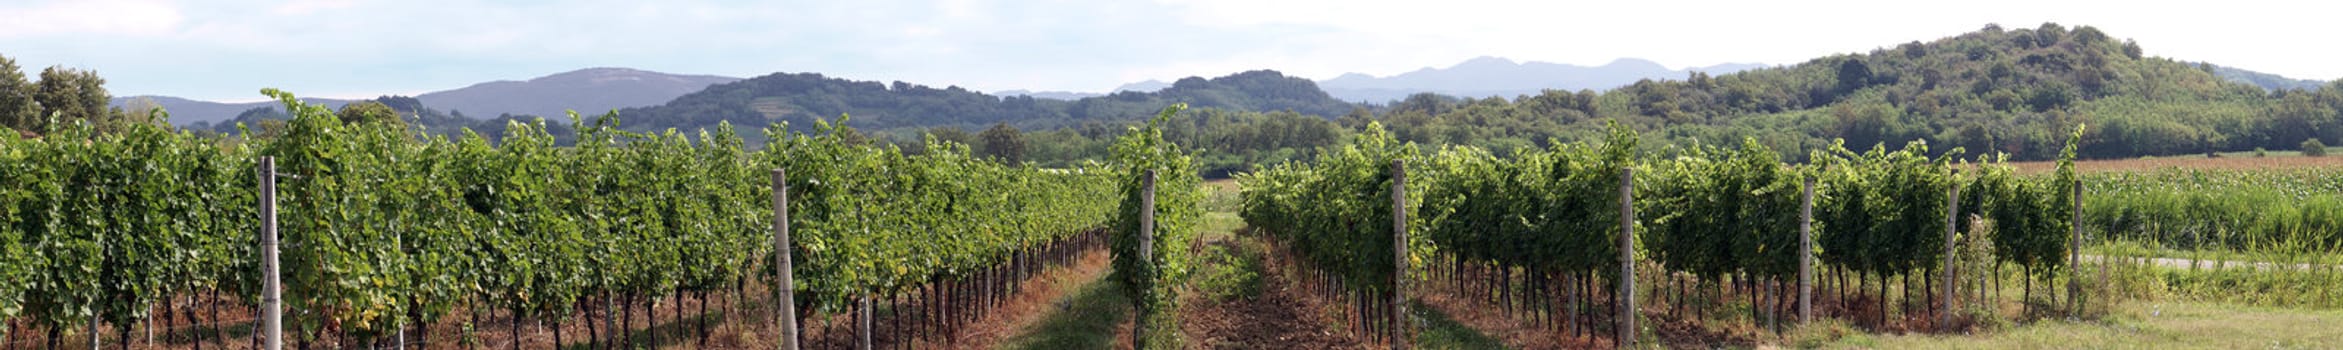 Vineyard and cornfield panorama with hills on the background.